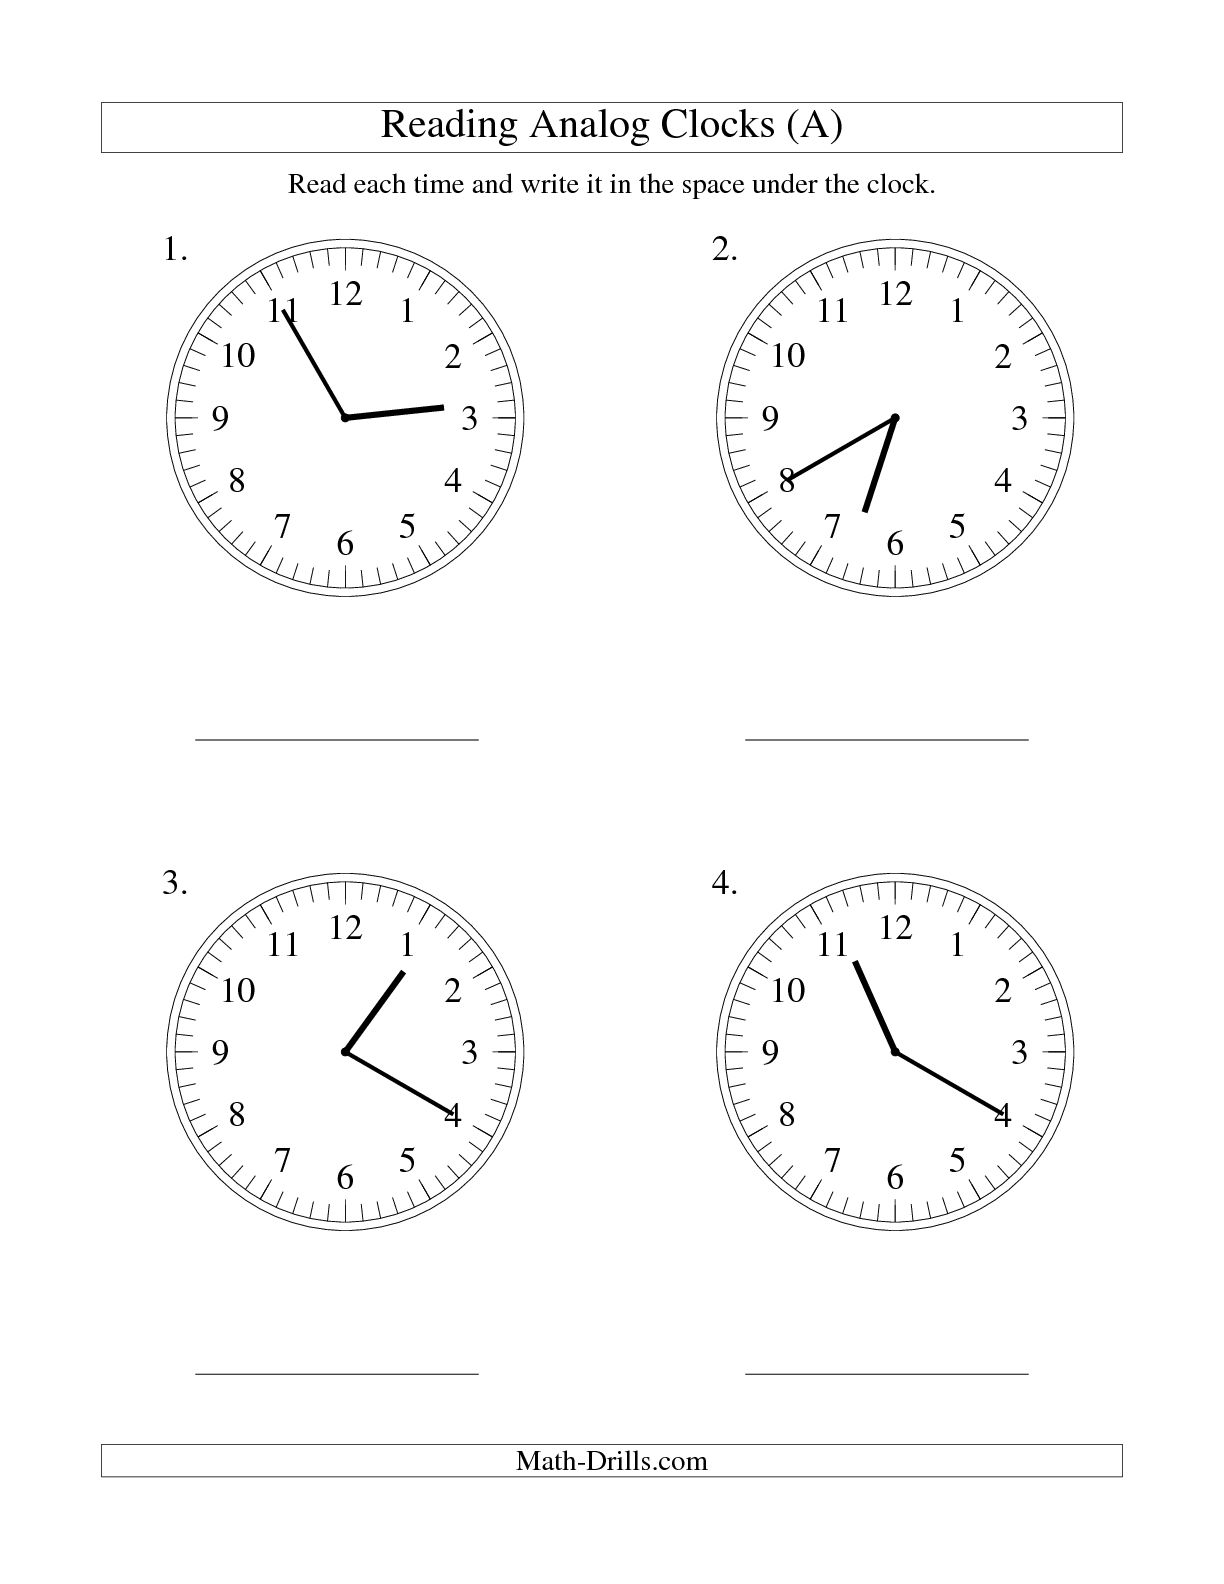 15 Best Images of Telling Time Worksheets By 5 Minutes - Telling Time